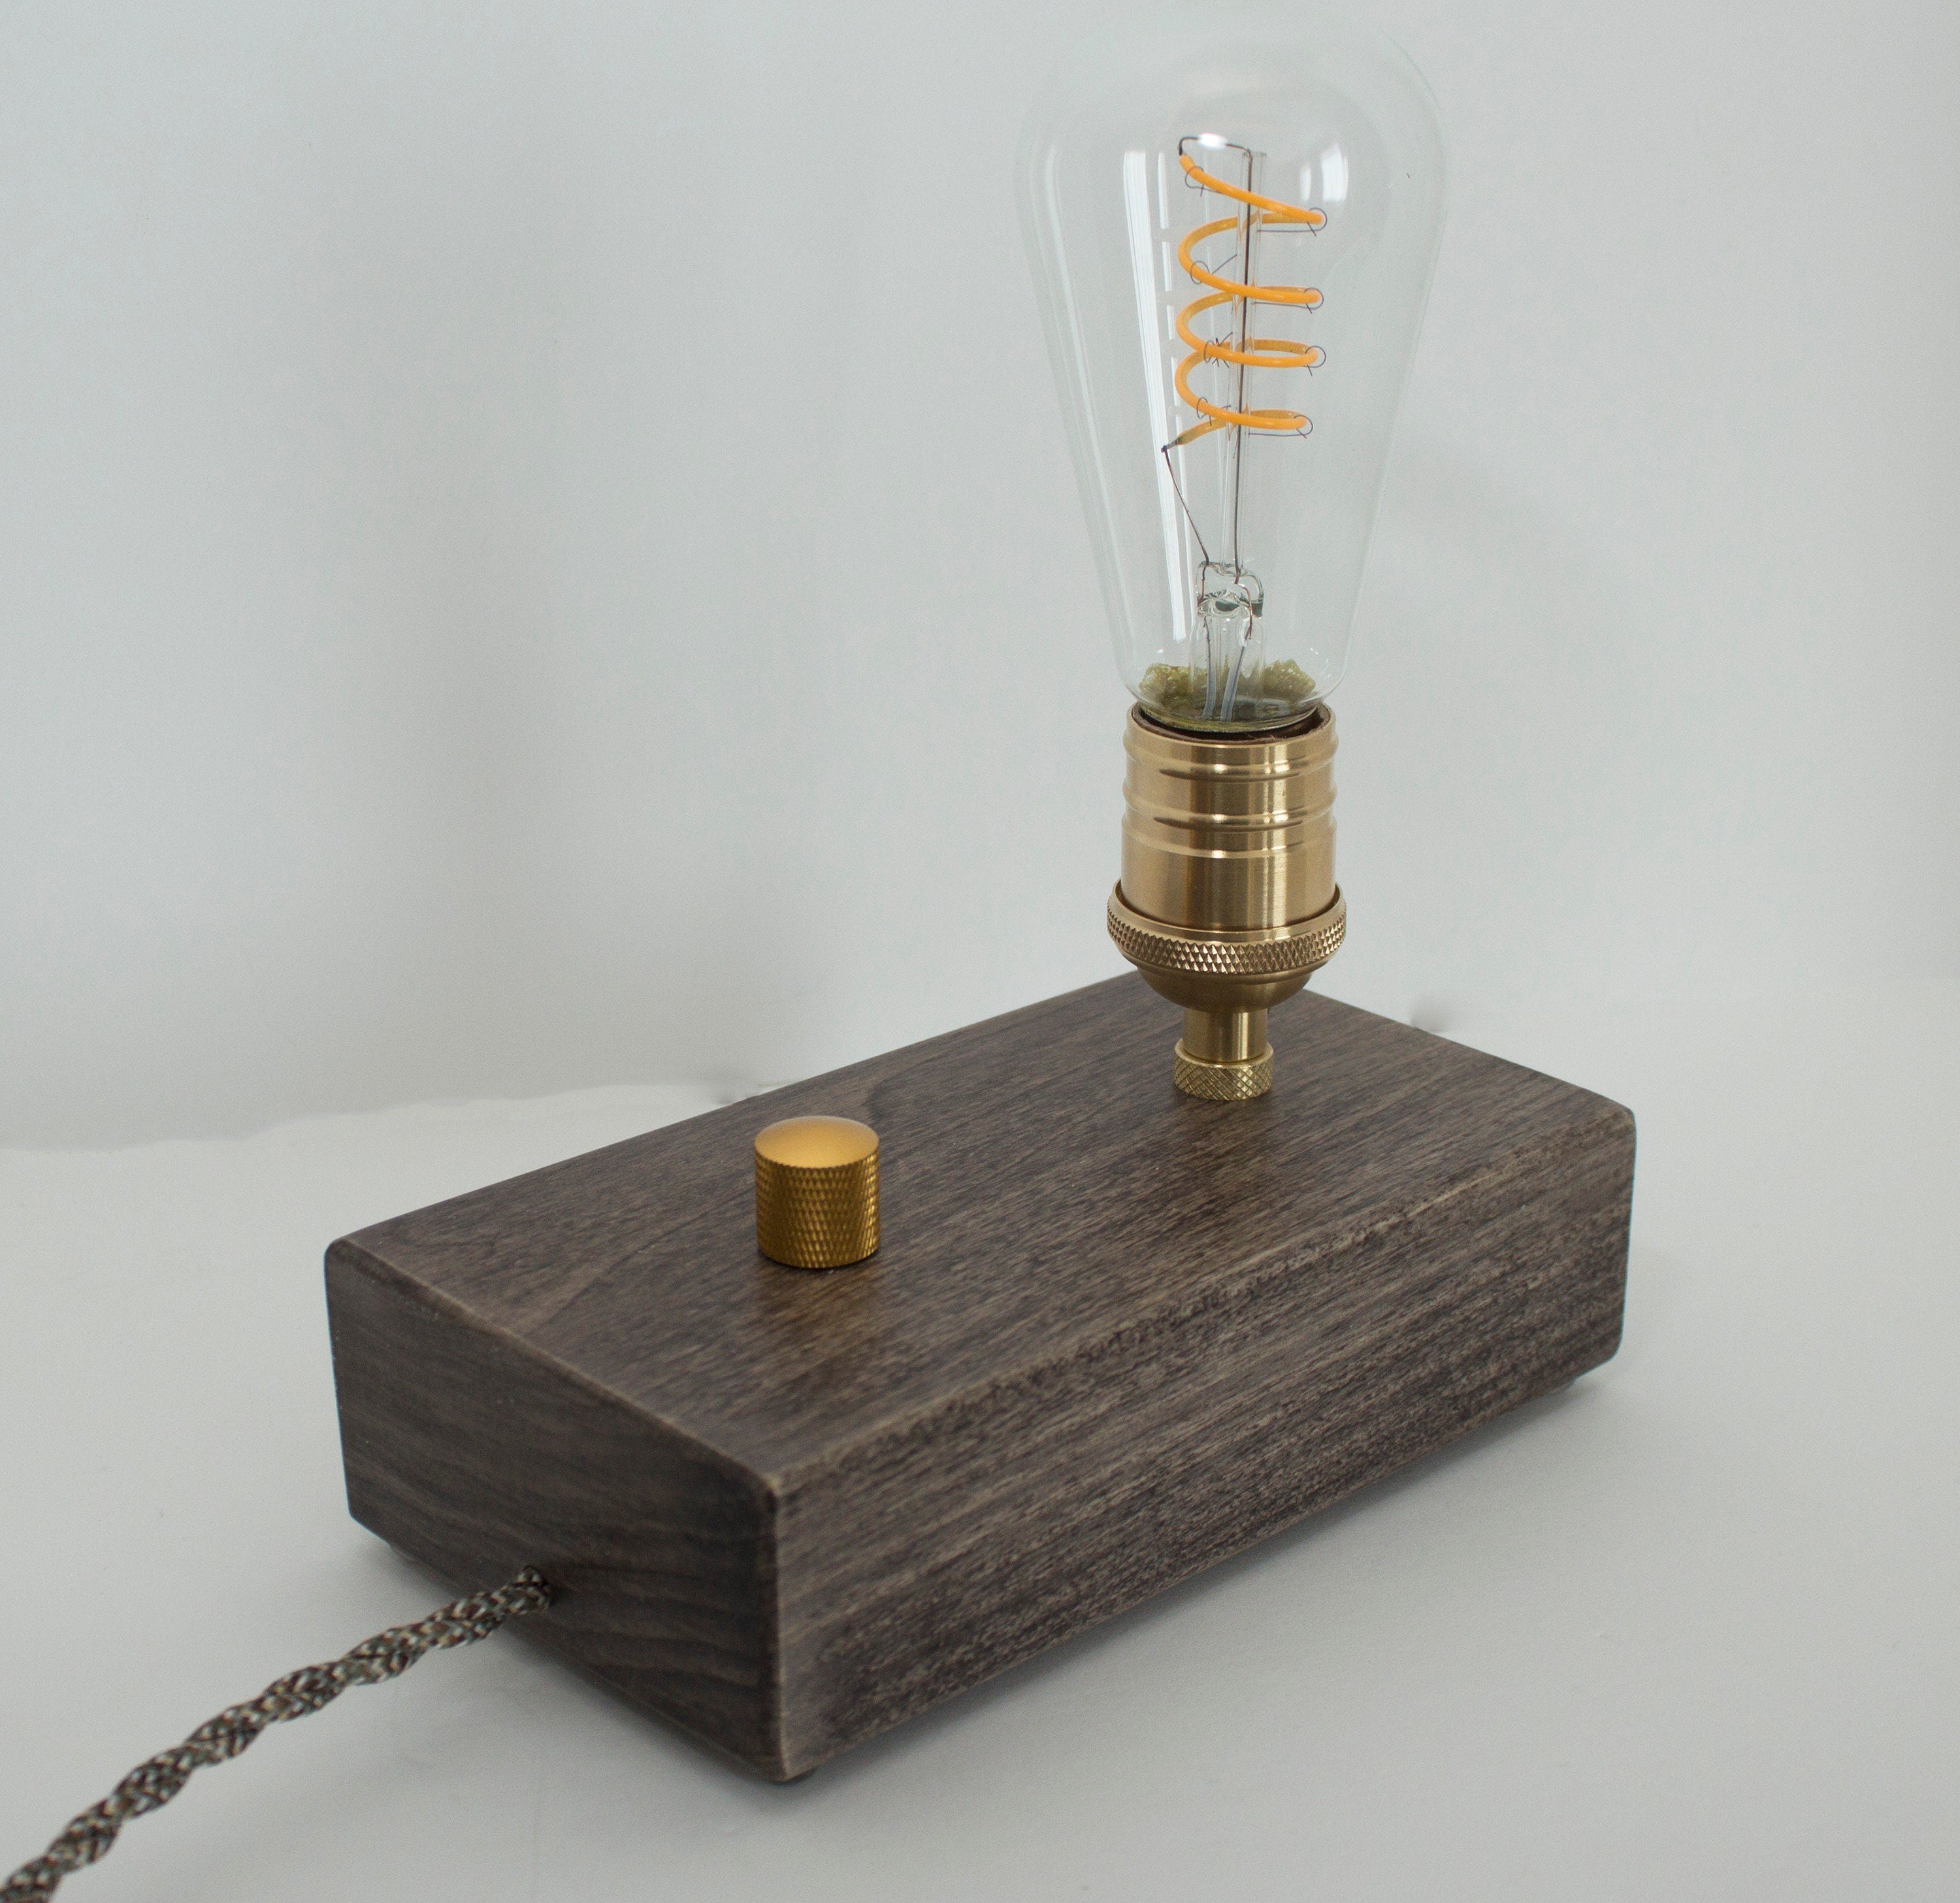 Personalized gift for Christmas, Edison Table Lamp, Wood Block,desk lamp  Standout EDC   